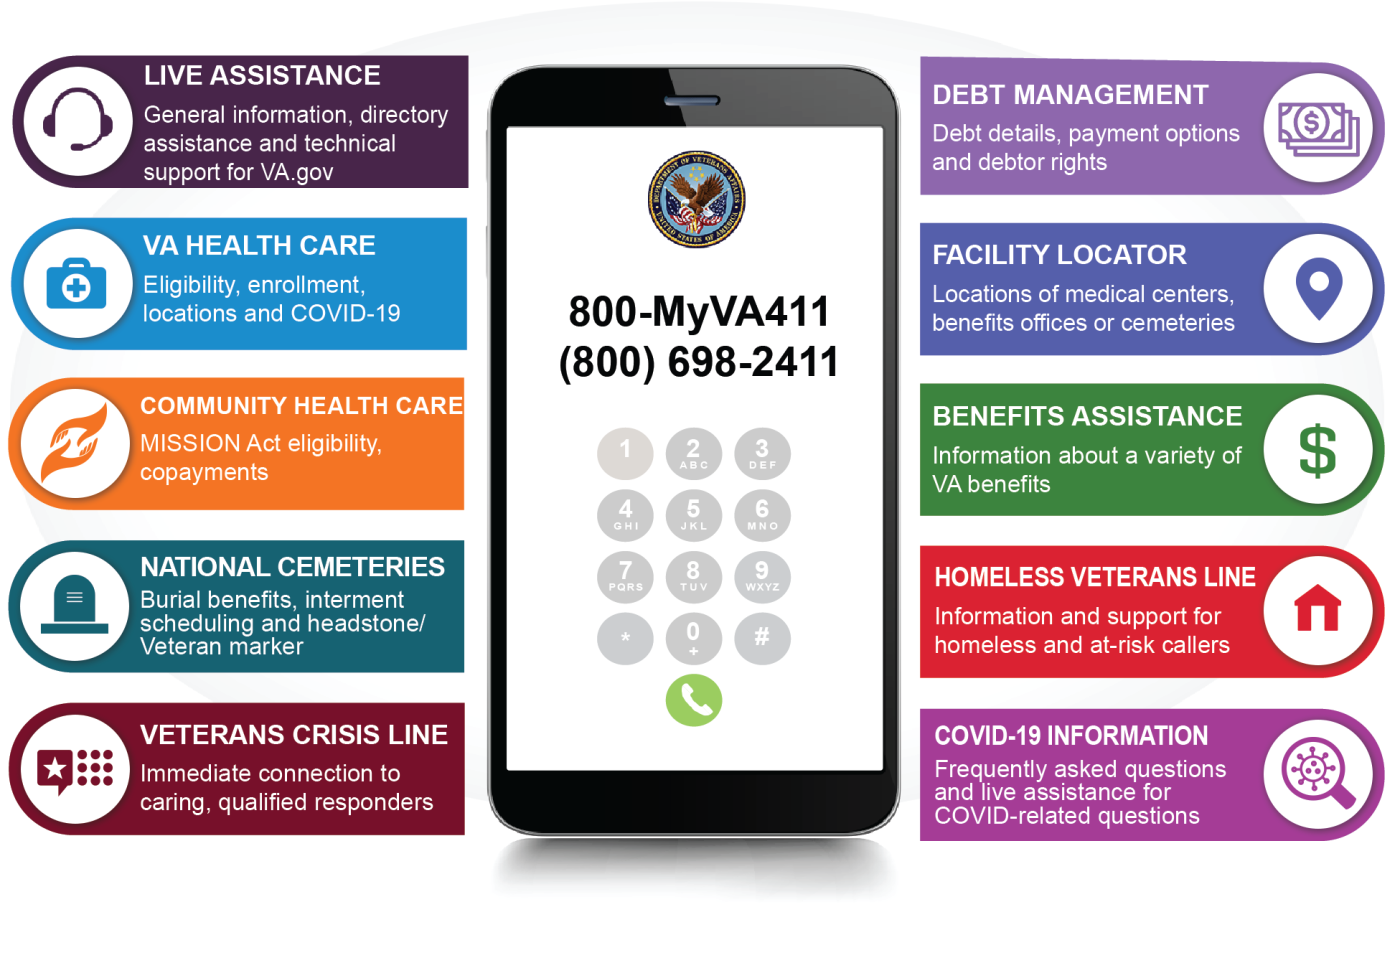 1-800-MyVA411 (800-698-2411) is the one number to reach VA